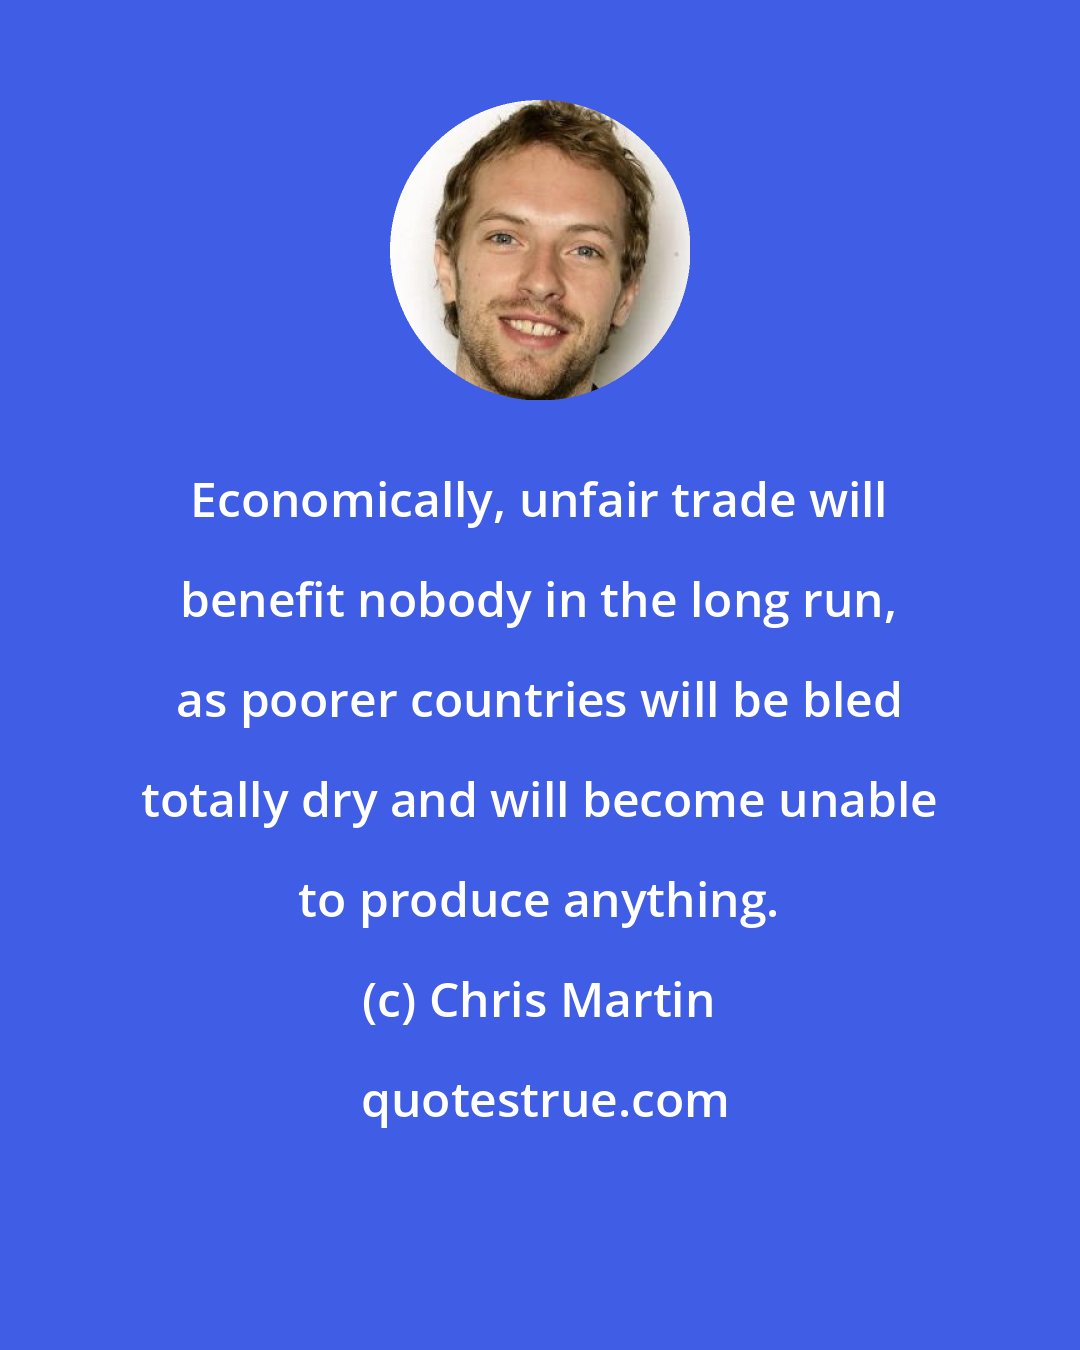 Chris Martin: Economically, unfair trade will benefit nobody in the long run, as poorer countries will be bled totally dry and will become unable to produce anything.